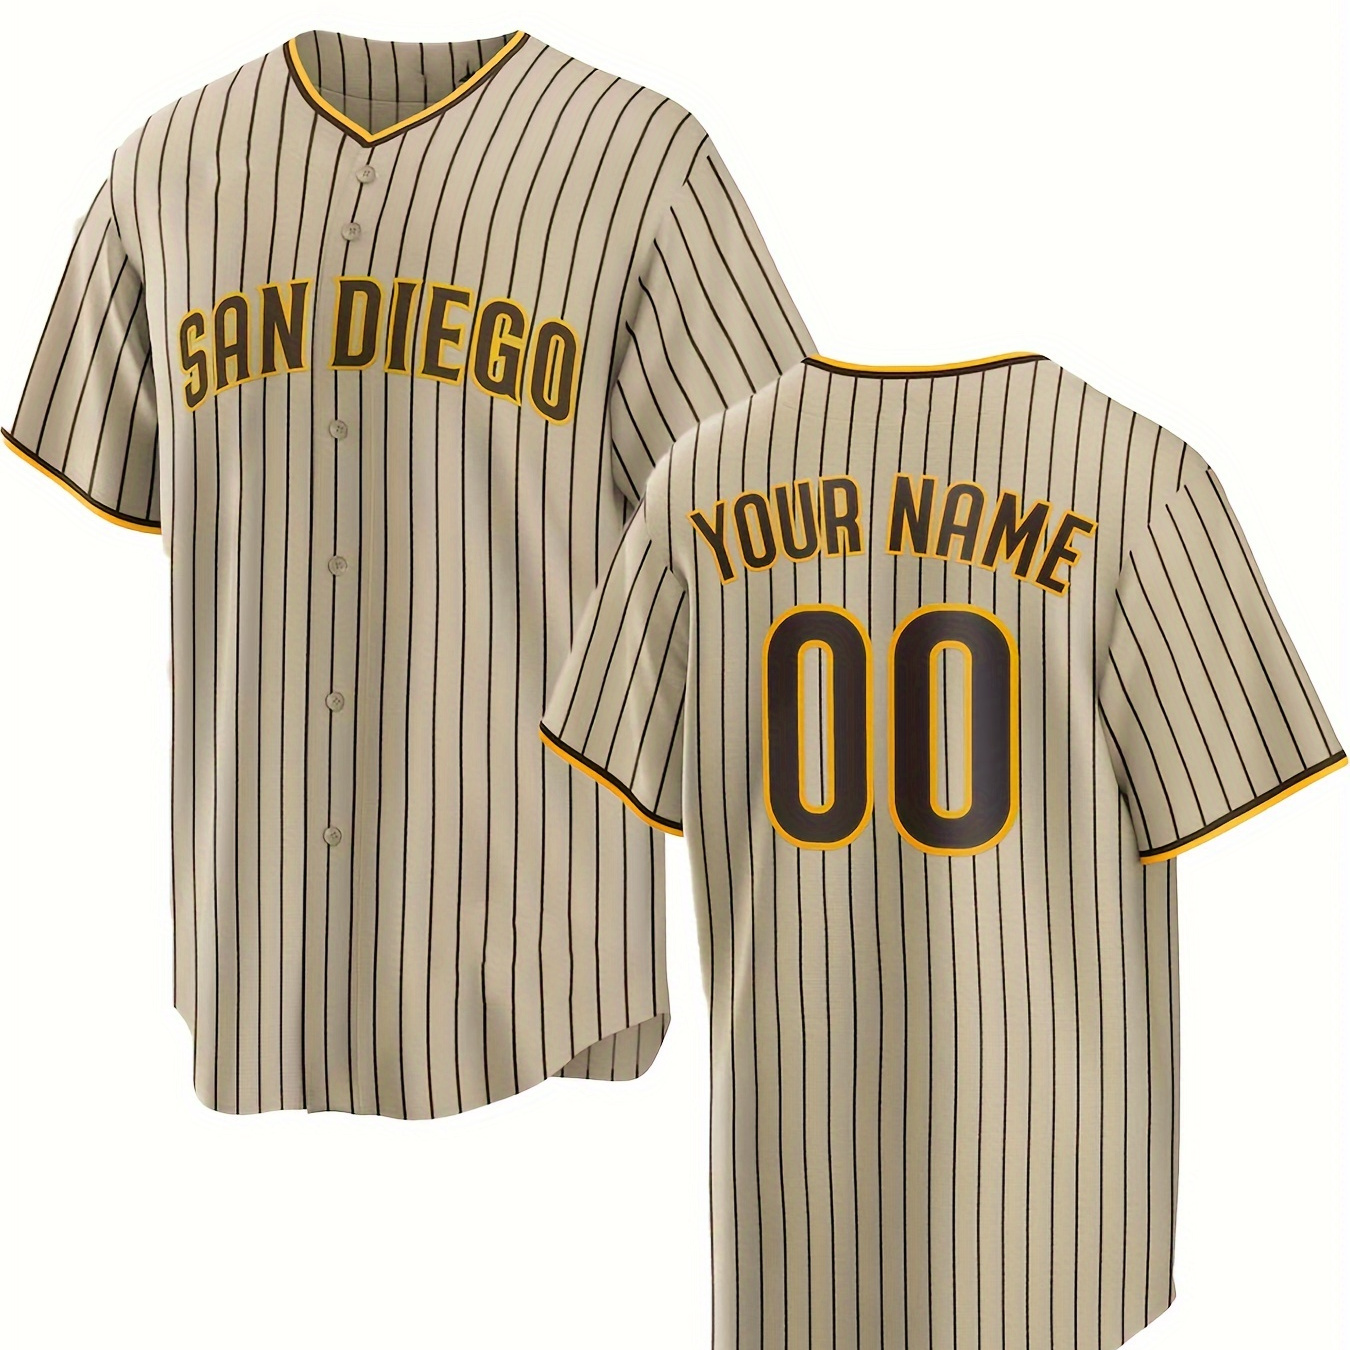 

Men's San Striped V-neck Baseball Jersey With Customized Name And Number, Comfy Top For Summer Sport